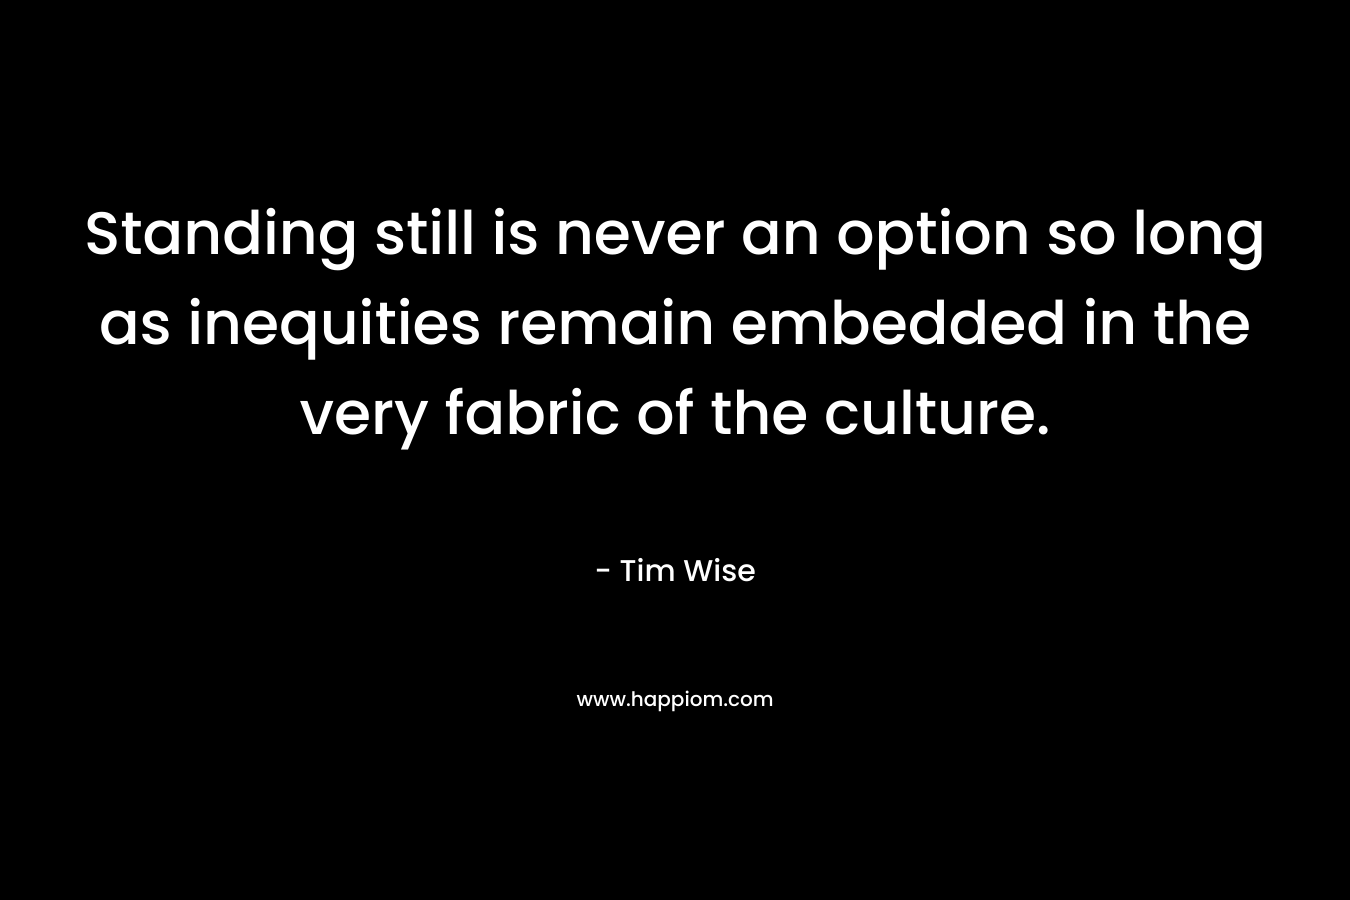 Standing still is never an option so long as inequities remain embedded in the very fabric of the culture. – Tim Wise